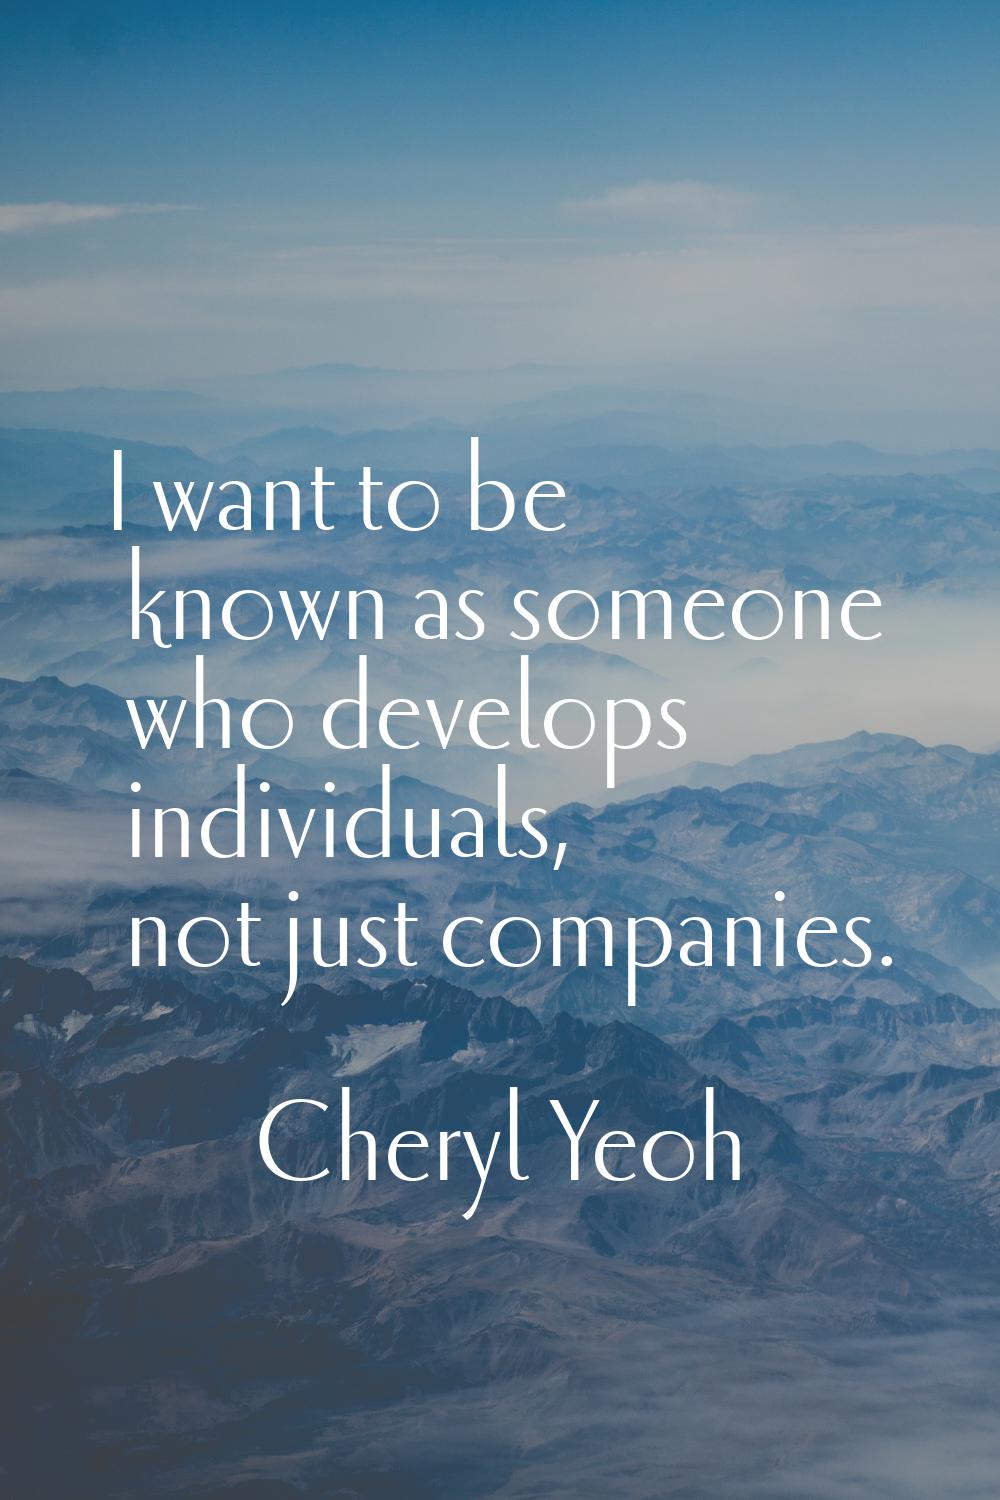 I want to be known as someone who develops individuals, not just companies.